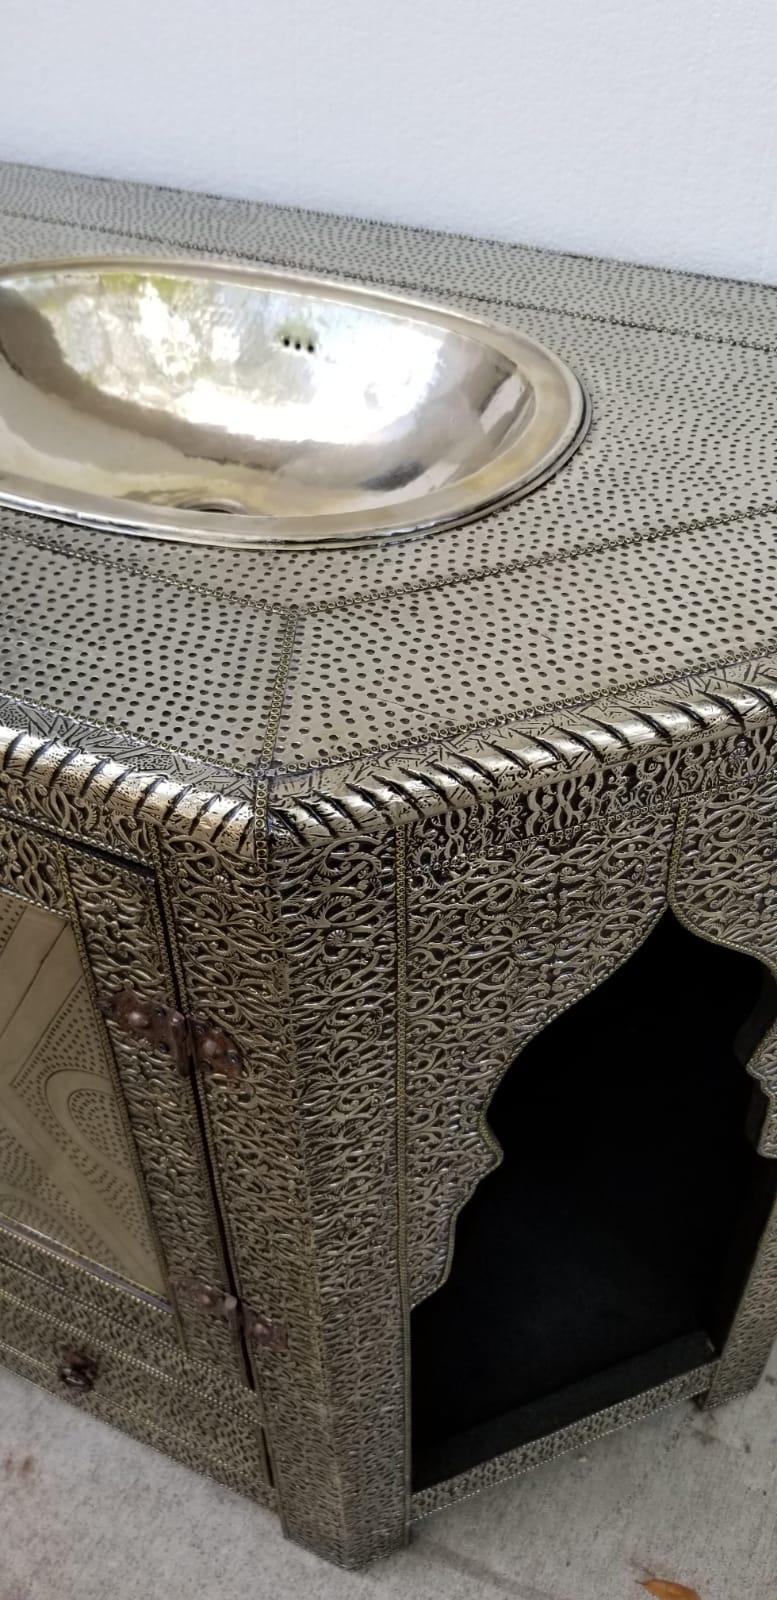 Silver sink vanity made in Morocco ,silver tone hand tooled silver metal.One has arches and one doesn't some price.